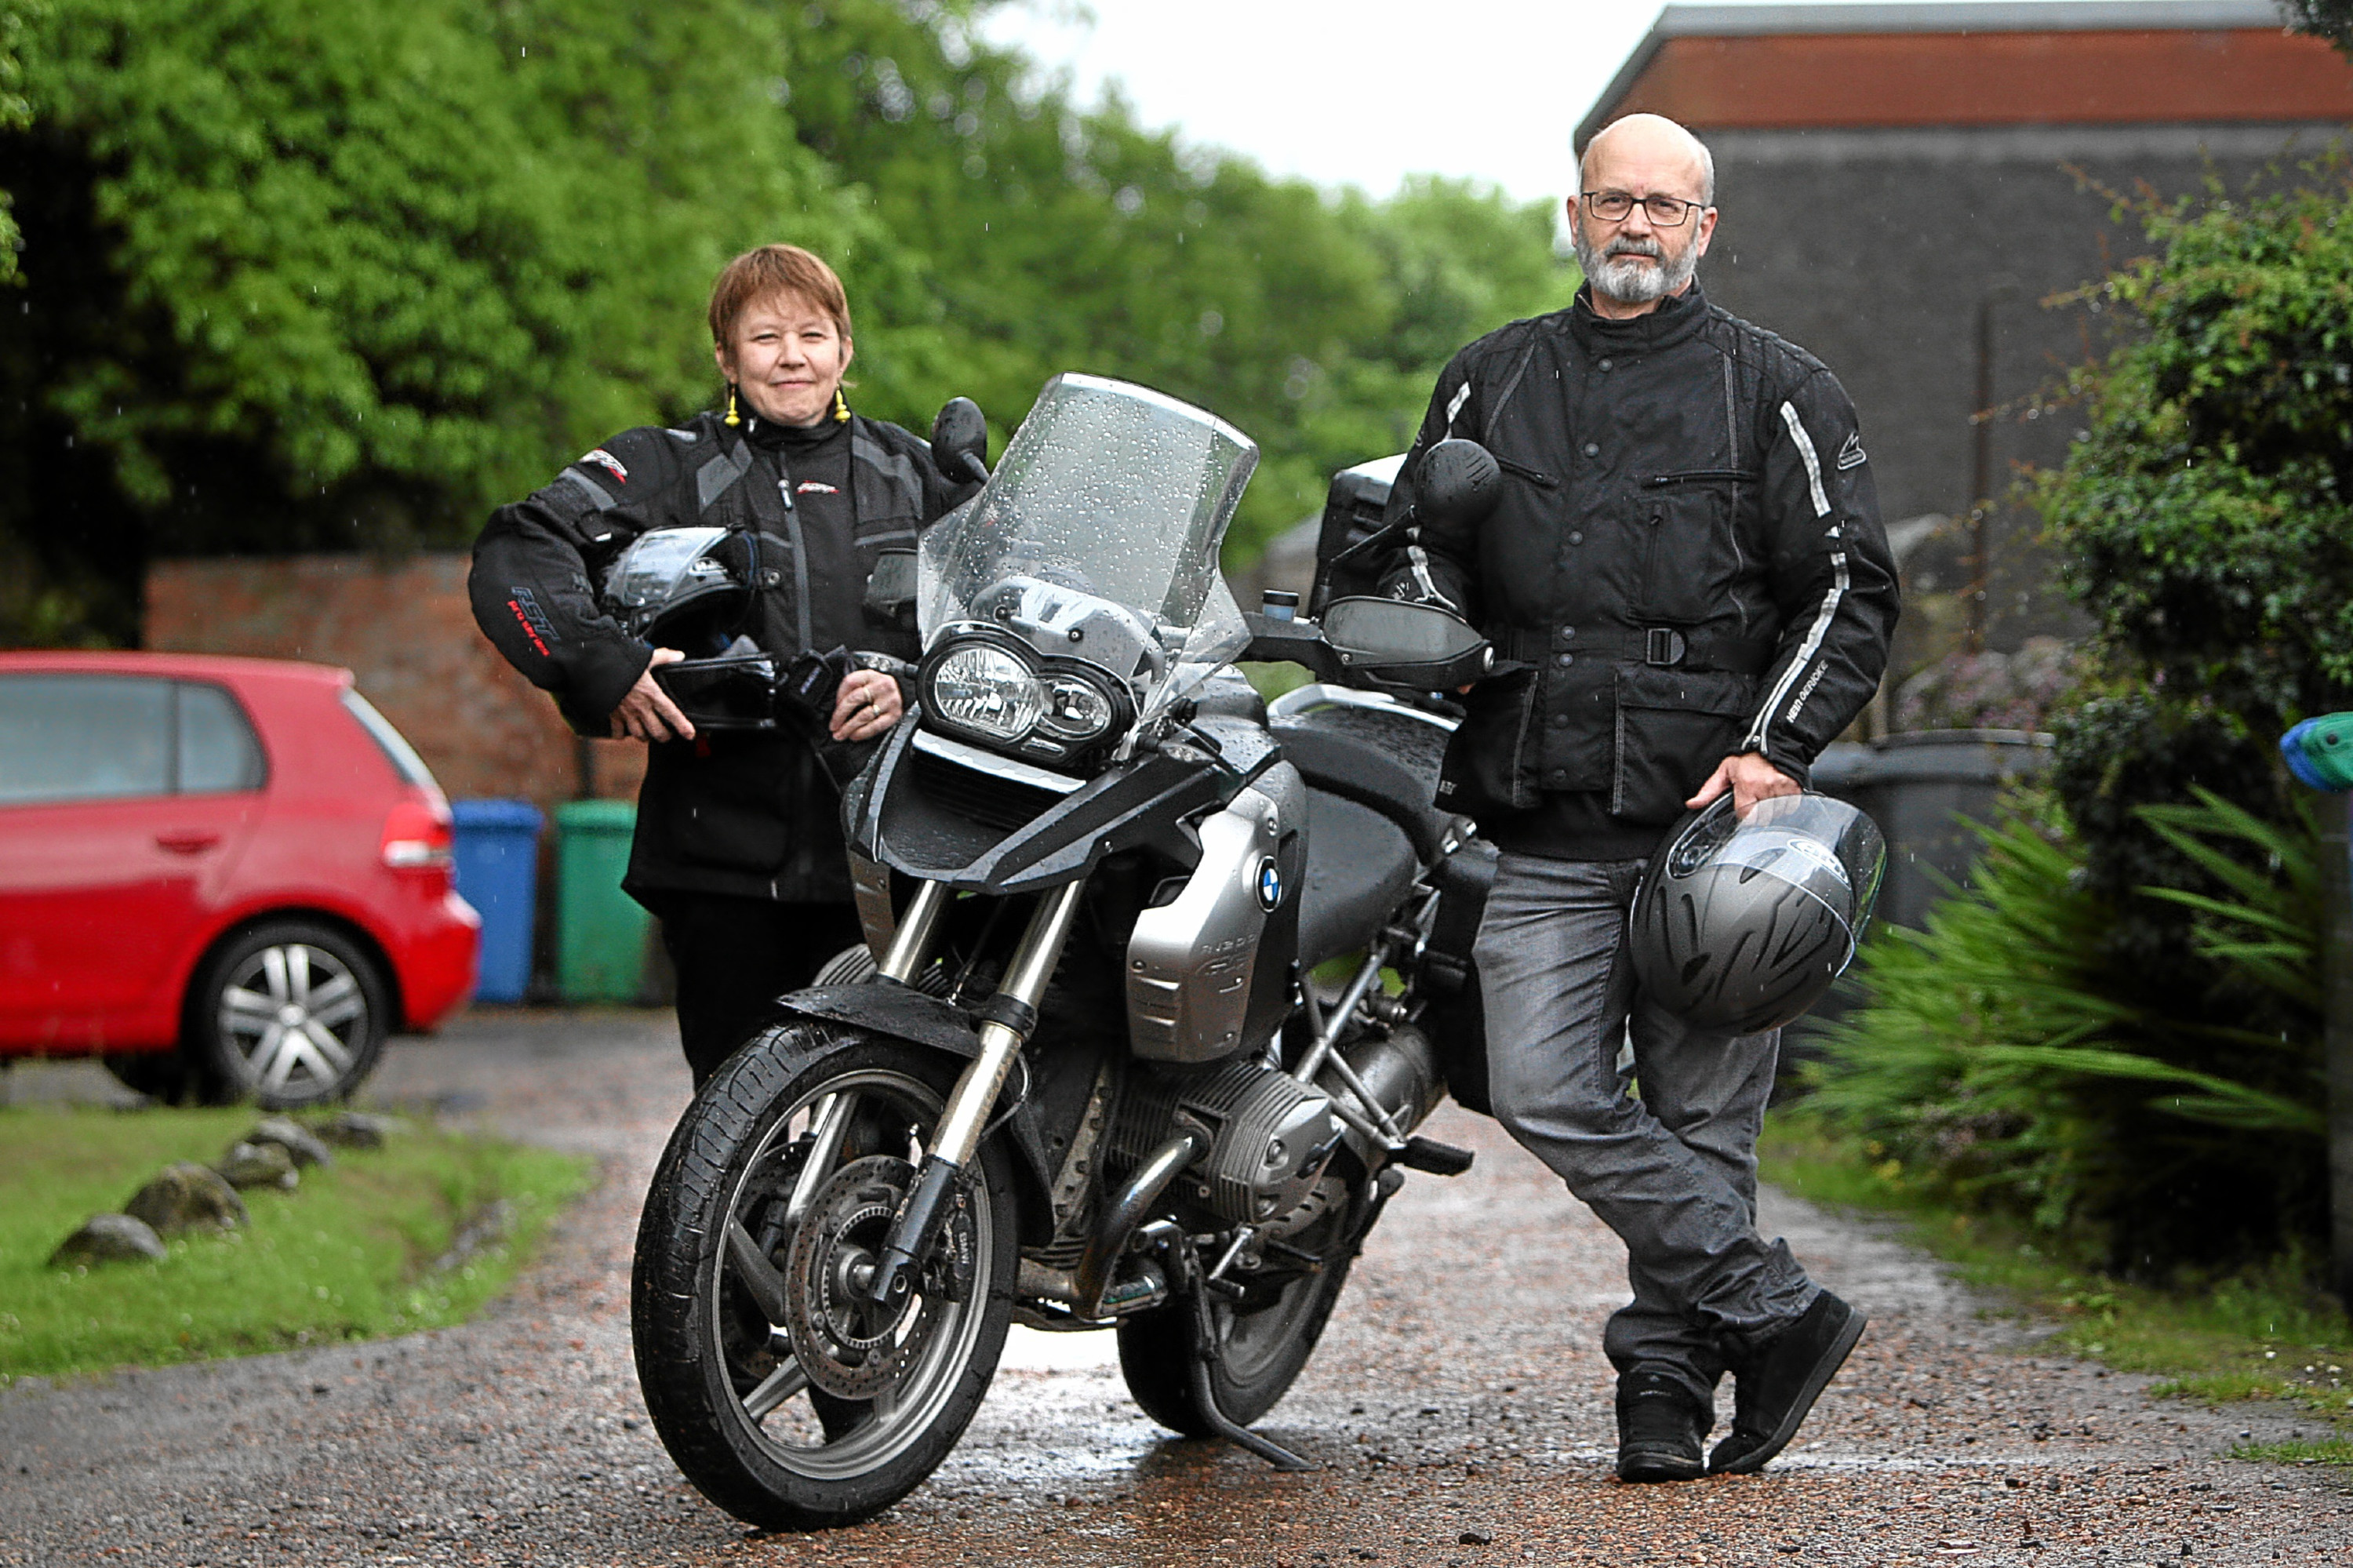 Calum and Liddy Laird, who are setting off on a trip of 1,041 miles to the four corners of Scotland by motorbike to raise funds for the Uphill Trust in Uganda.